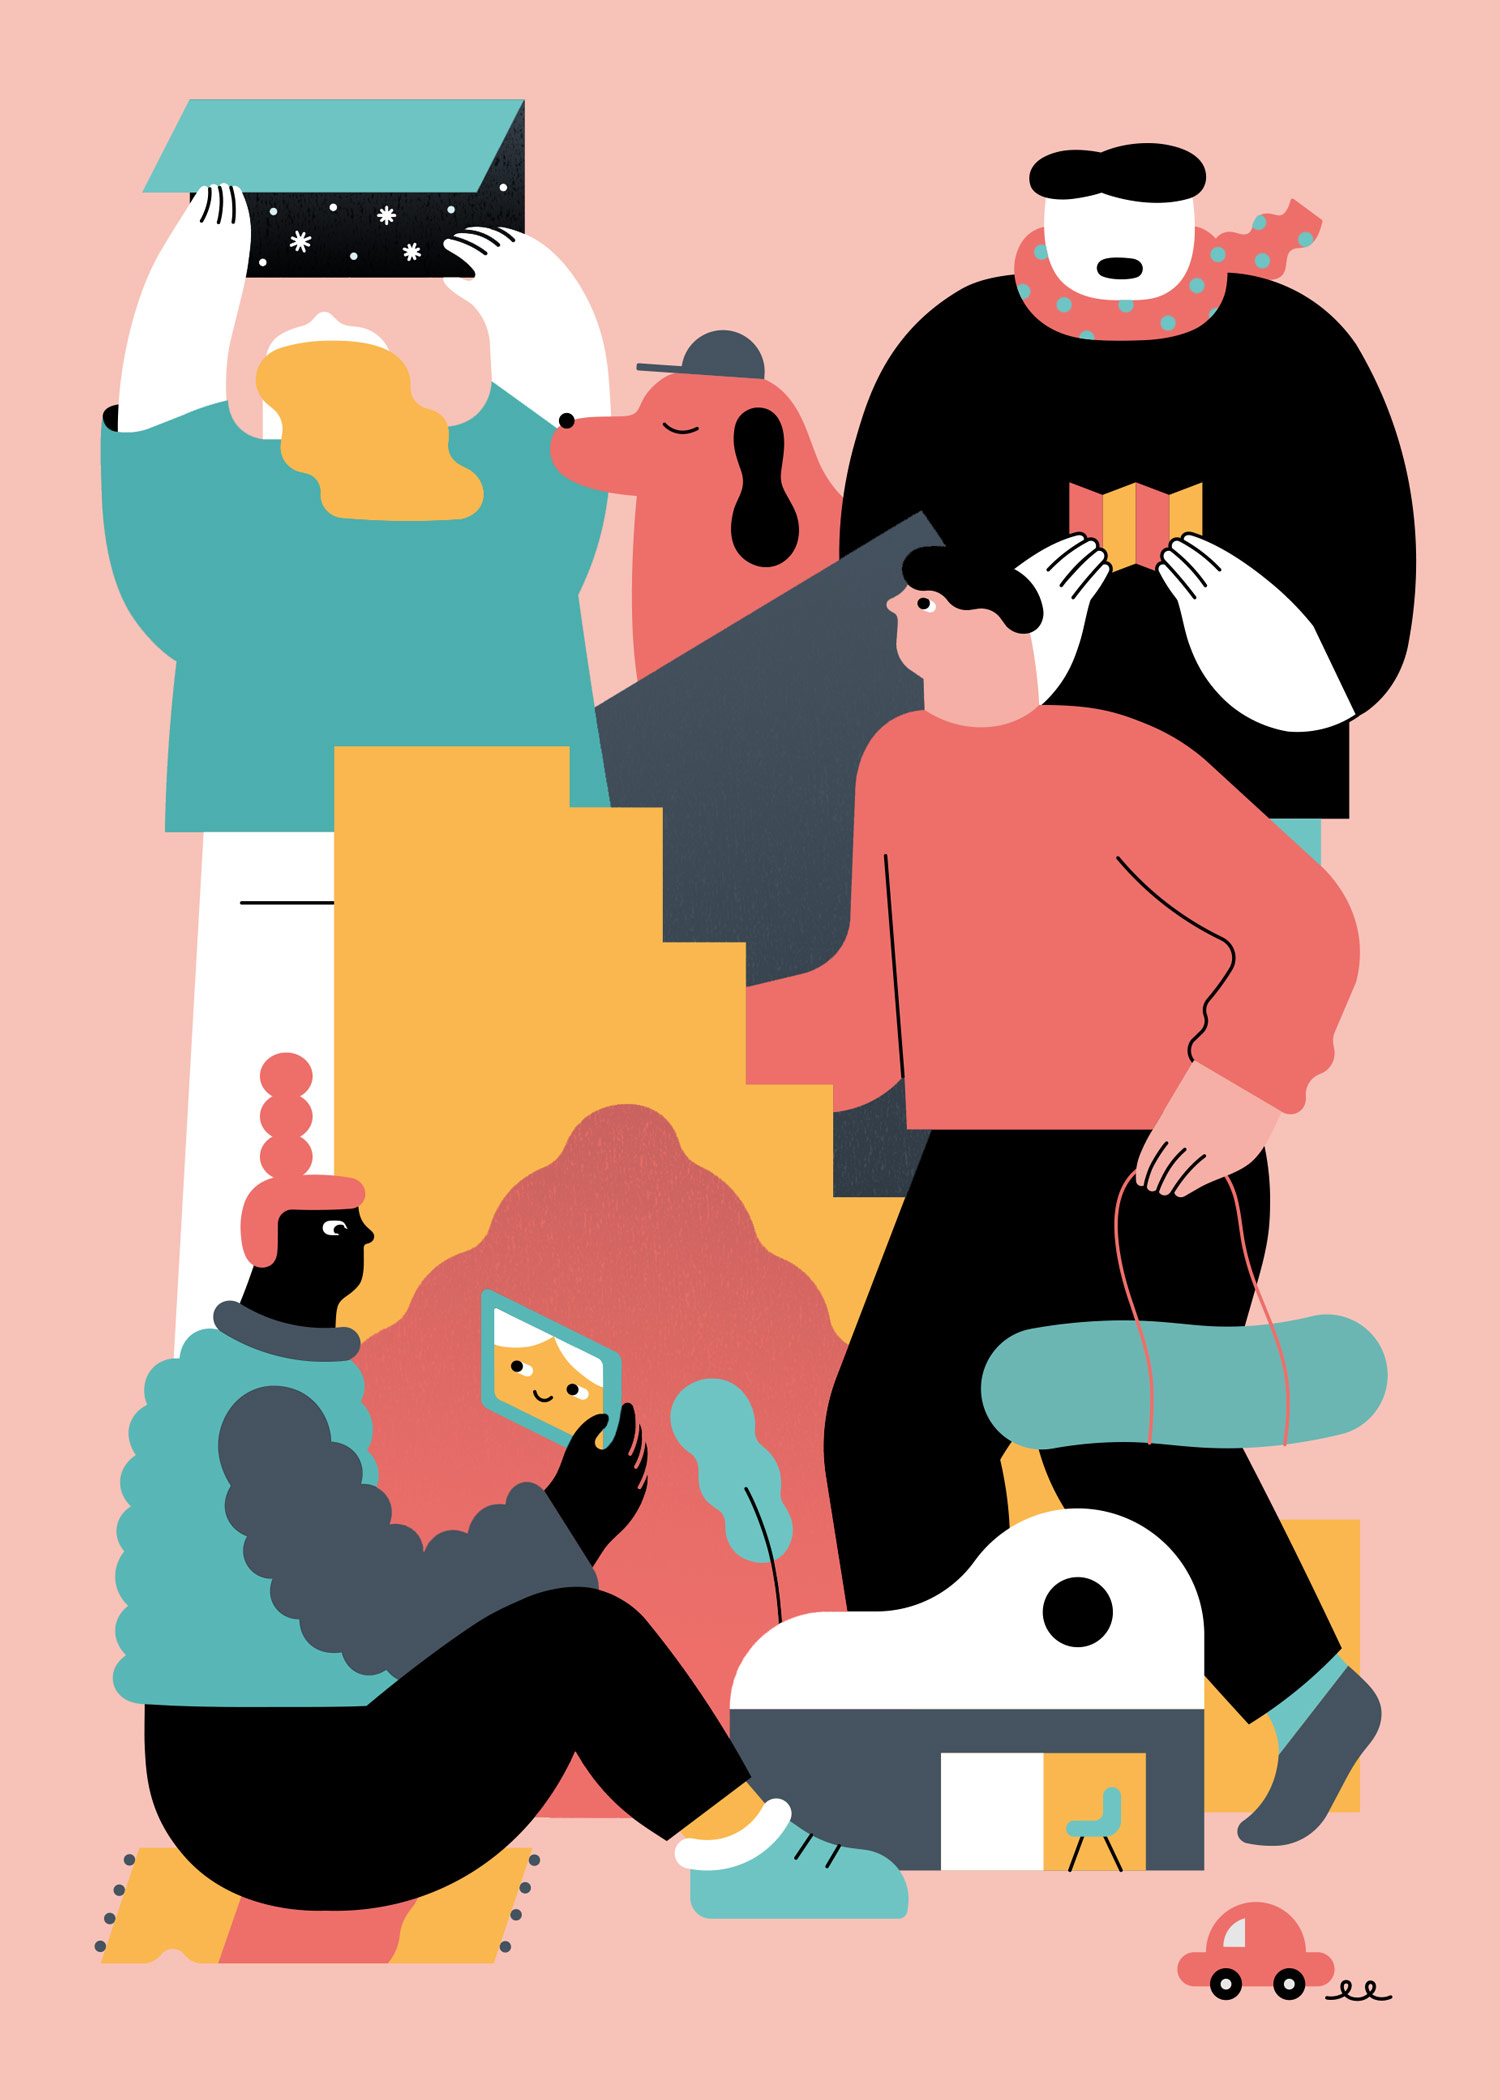 Part of a series of illustrations for Airbnb’s Culture Report